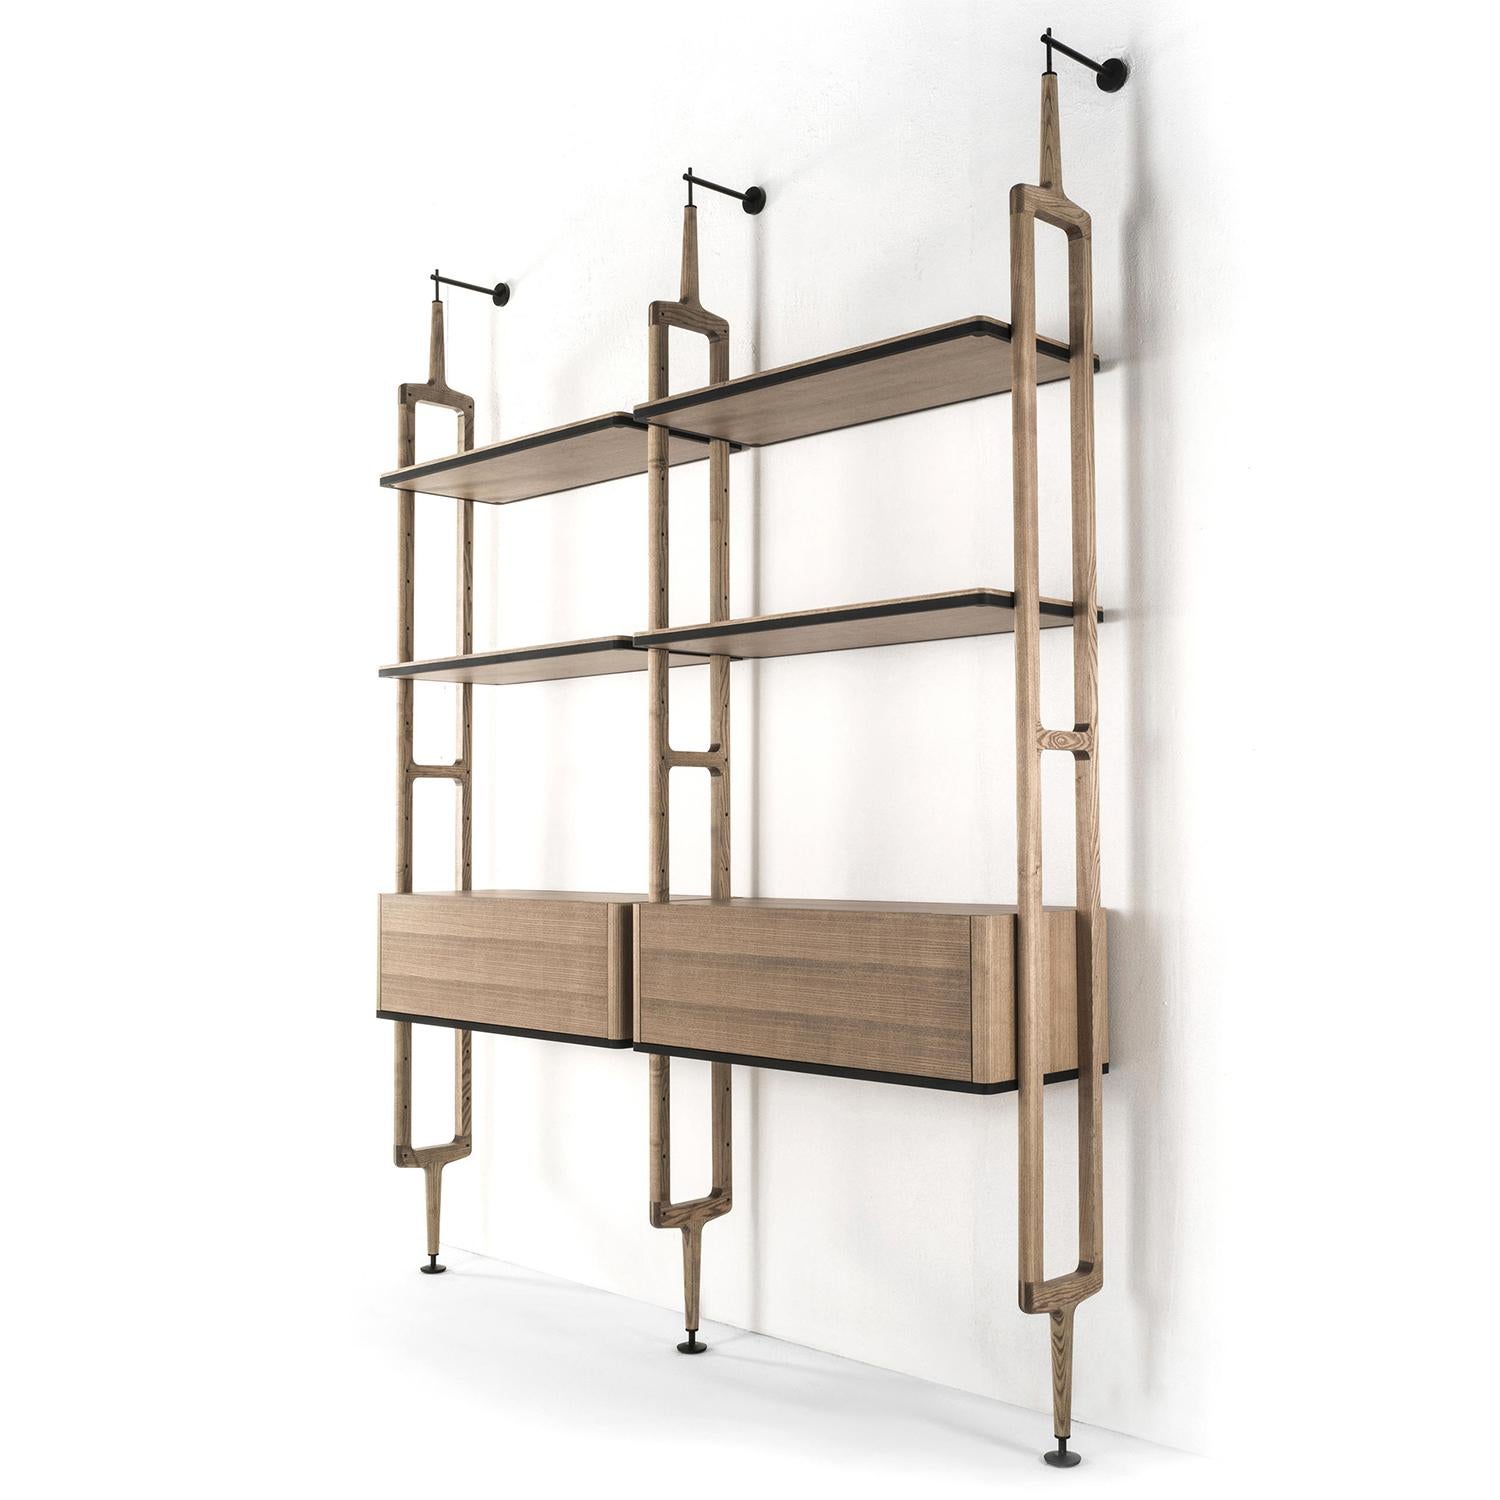 Perla Bookcase with all elements in solid ash wood in 
natural finish. Bookcase composed of 3 vertical structures
in solid ash with fixing system from floor to the ceiling or to 
the wall, with fixing elements in metal in matt black finish. 
With 4